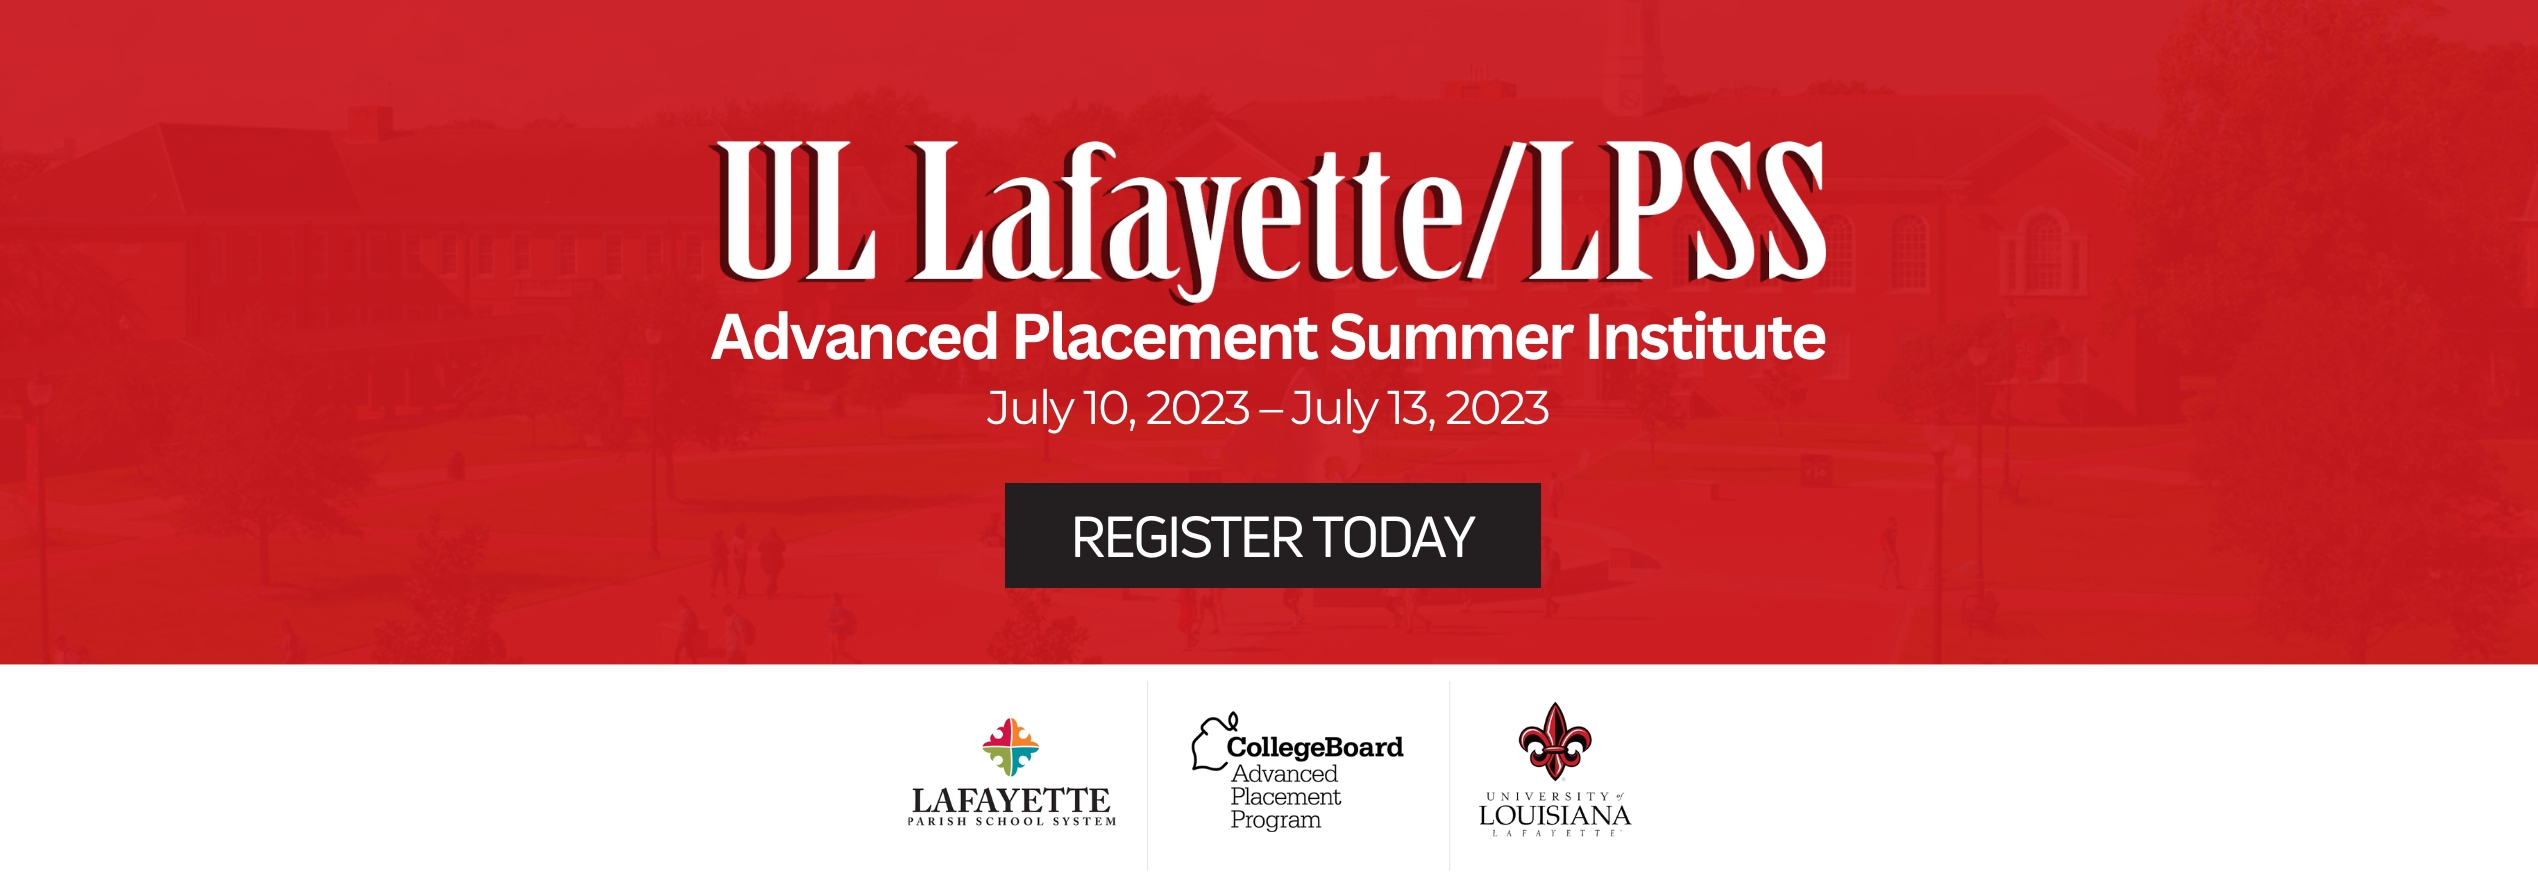 Advanced Placement Summer Institute - Register Now!